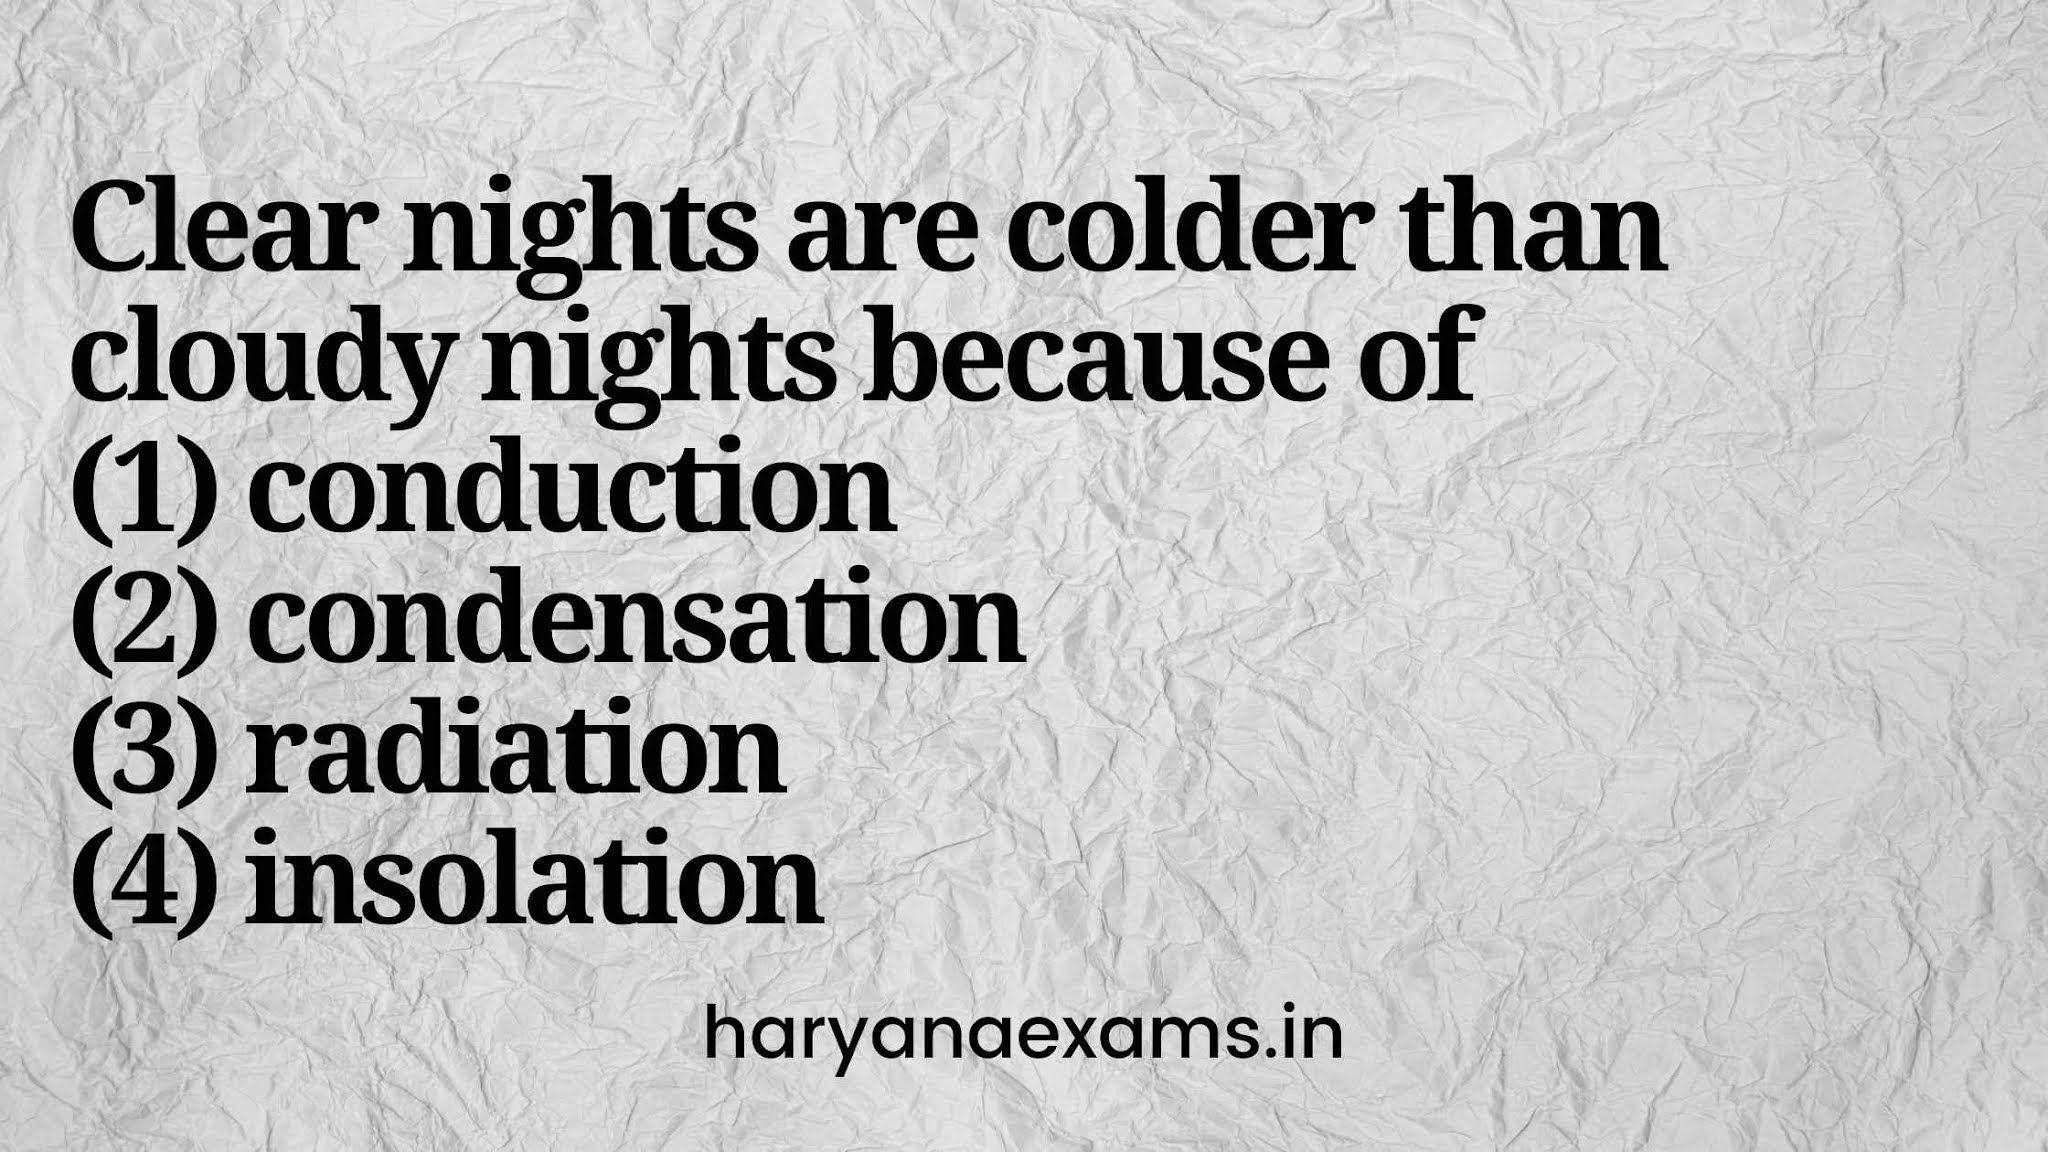 Clear nights are colder than cloudy nights because of